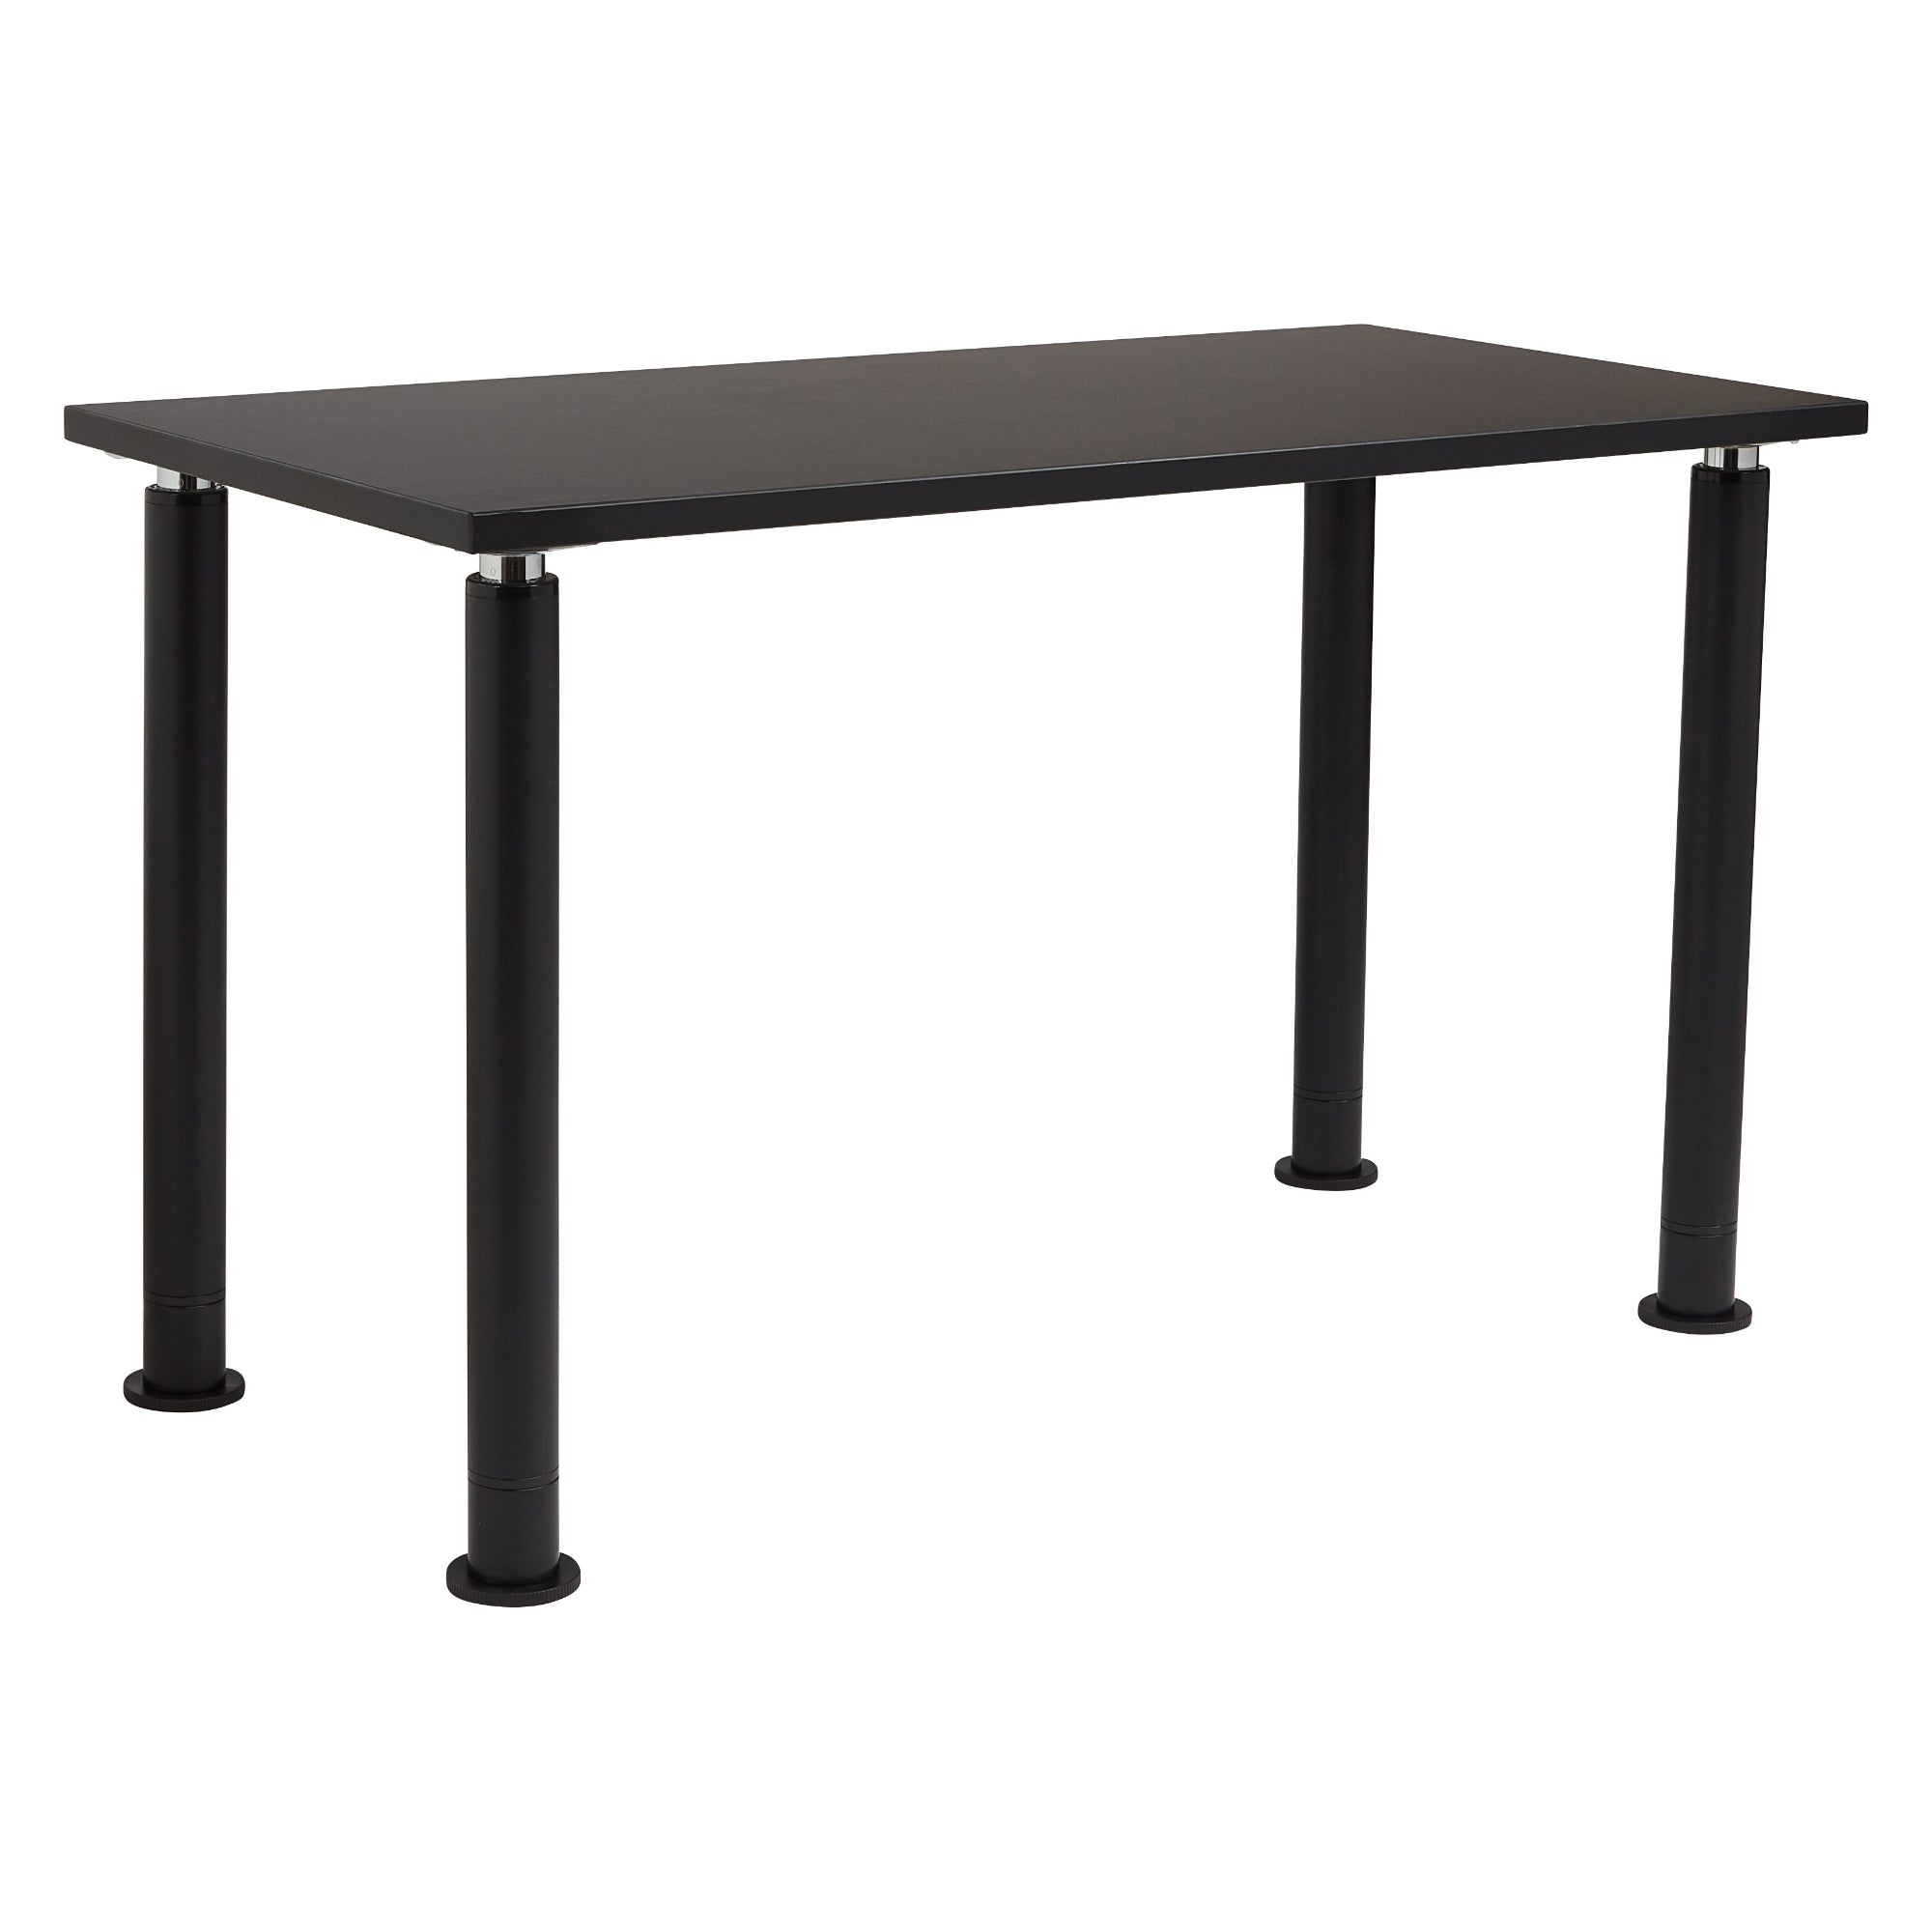 Designer Series Adjustable Height Science Table, 24" x 72" x 27"-42" H, Chemical Resistant Top